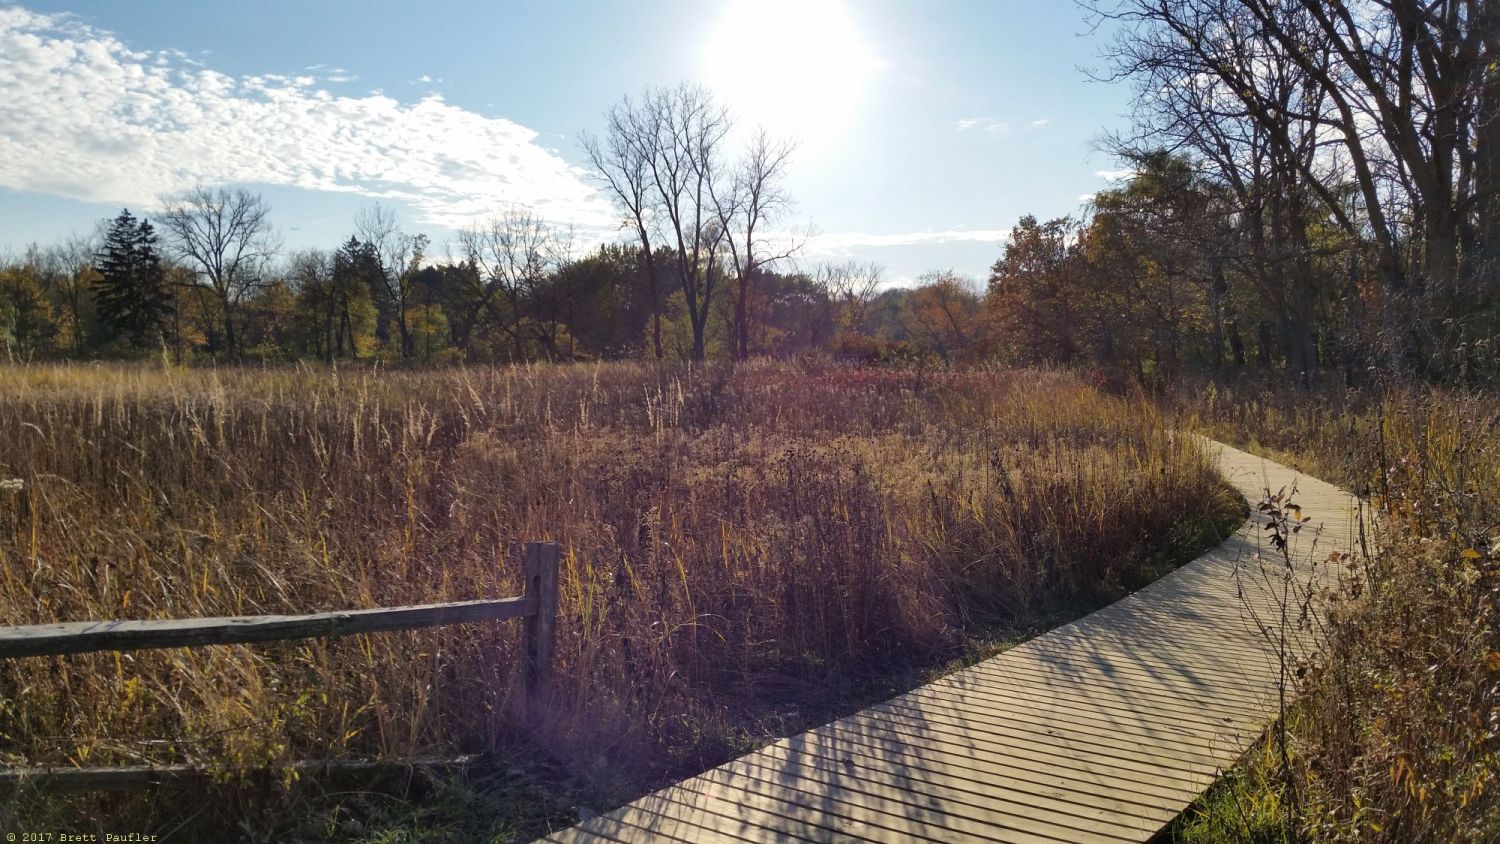 Back to the forest preserve, this is a woodwalkway path through a reed filled, marsh, bog, prairie lowland type area, brown grass field, shoulder height, surrounded by trees in the distance, coming to the end of a nice day